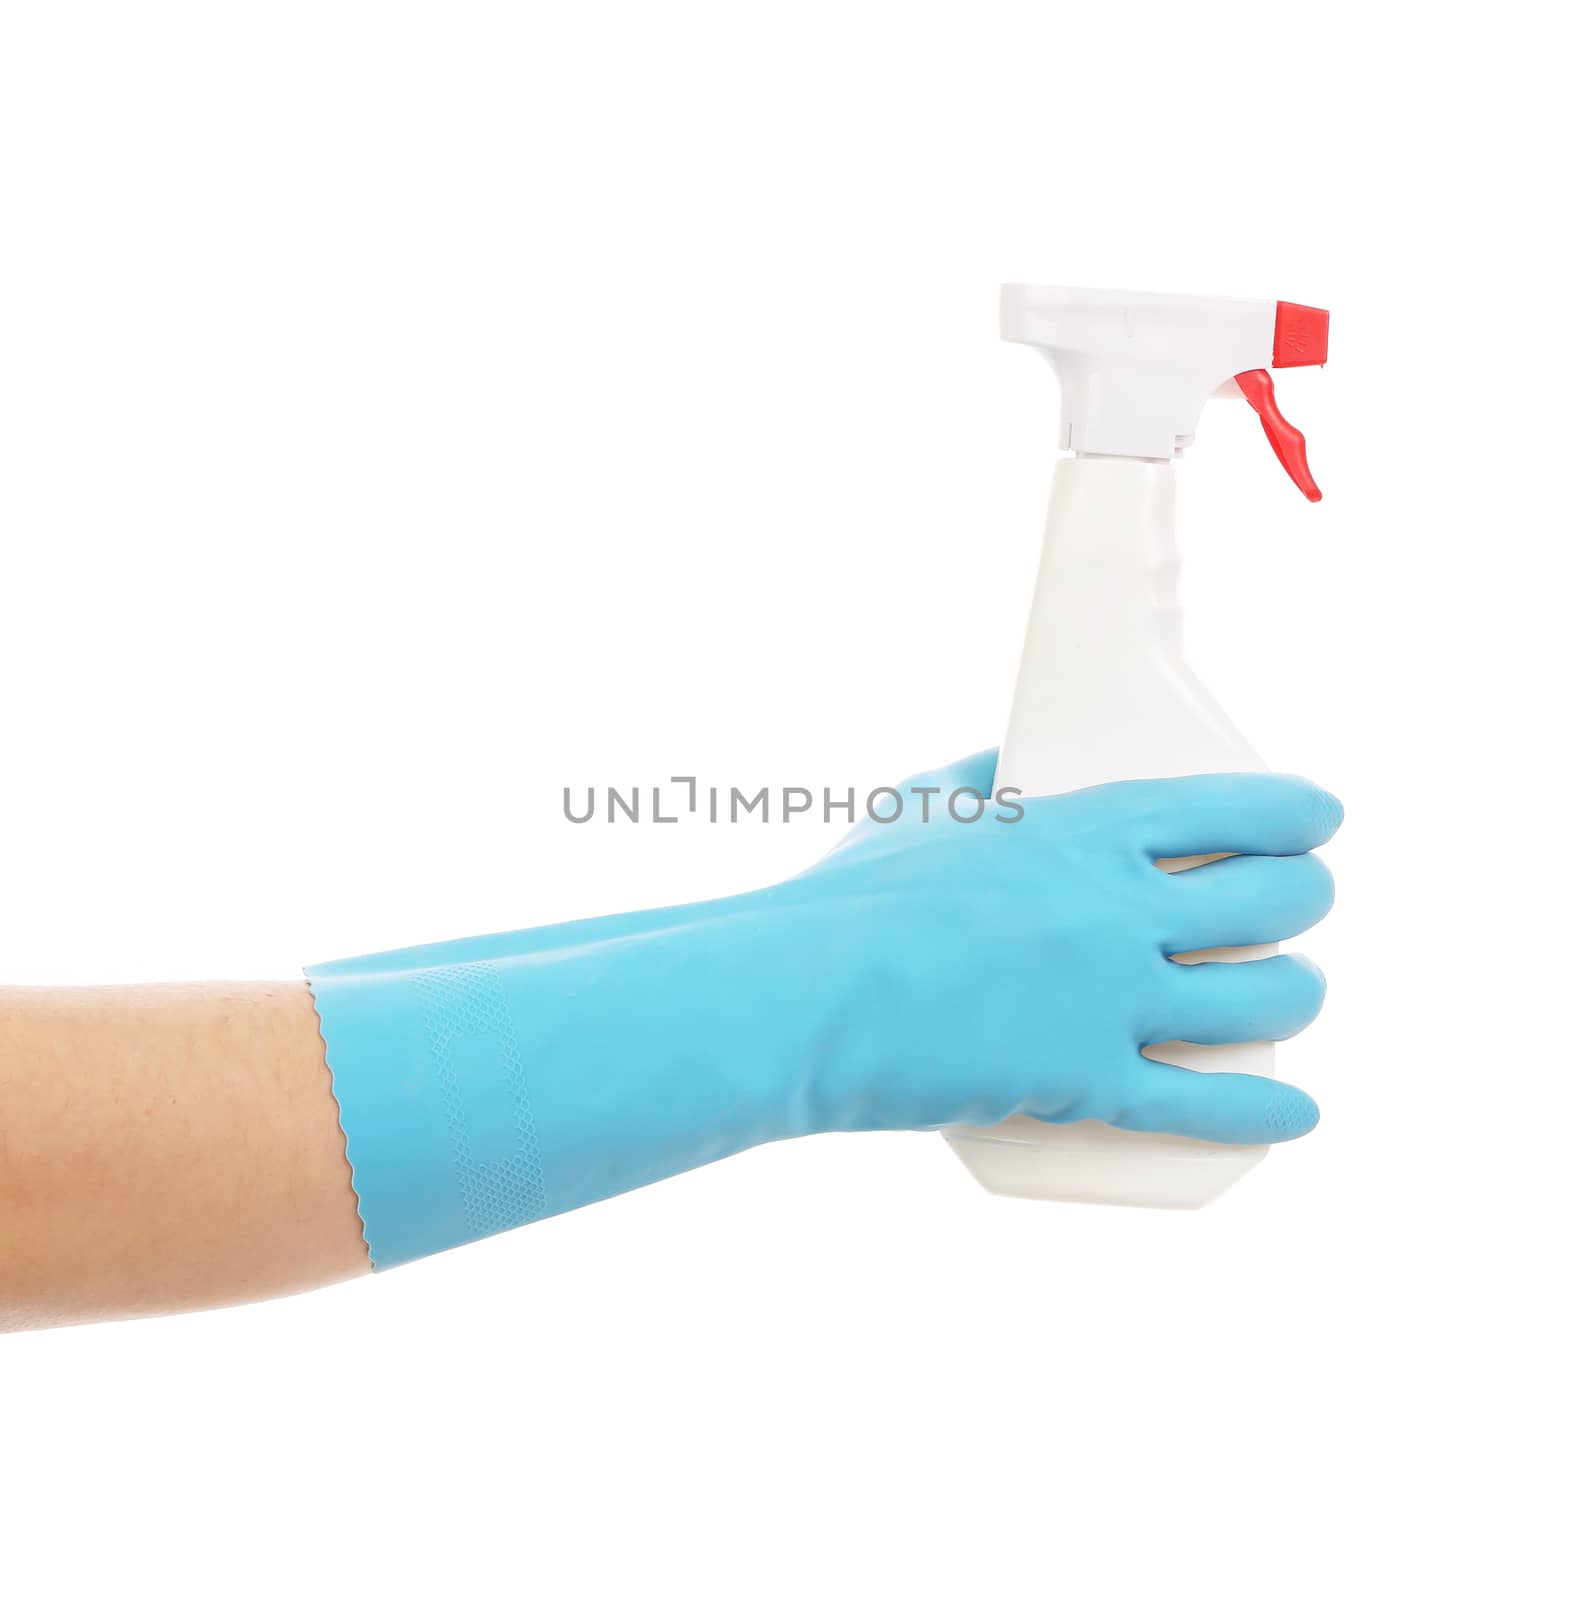 Hand in glove holding white plastic spray bottle. Isolated on a white background.